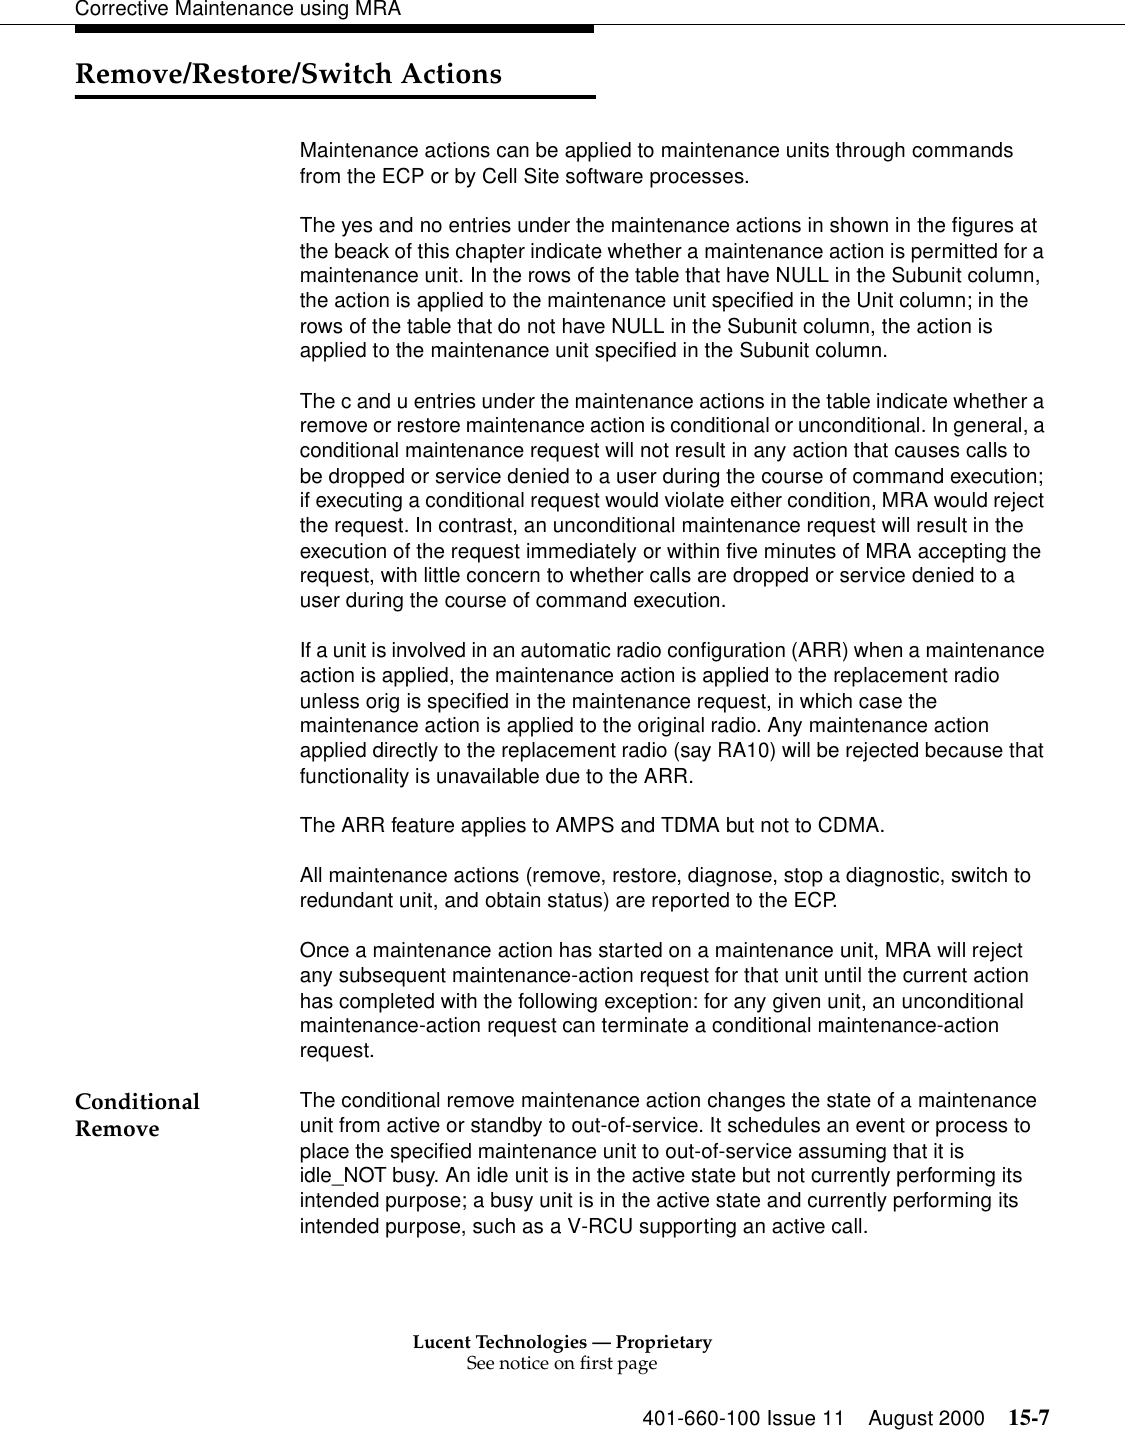 Lucent Technologies — ProprietarySee notice on first page401-660-100 Issue 11 August 2000 15-7Corrective Maintenance using MRARemove/Restore/Switch ActionsMaintenance actions can be applied to maintenance units through commands from the ECP or by Cell Site software processes. The yes and no entries under the maintenance actions in shown in the figures at the beack of this chapter indicate whether a maintenance action is permitted for a maintenance unit. In the rows of the table that have NULL in the Subunit column, the action is applied to the maintenance unit specified in the Unit column; in the rows of the table that do not have NULL in the Subunit column, the action is applied to the maintenance unit specified in the Subunit column. The c and u entries under the maintenance actions in the table indicate whether a remove or restore maintenance action is conditional or unconditional. In general, a conditional maintenance request will not result in any action that causes calls to be dropped or service denied to a user during the course of command execution; if executing a conditional request would violate either condition, MRA would reject the request. In contrast, an unconditional maintenance request will result in the execution of the request immediately or within five minutes of MRA accepting the request, with little concern to whether calls are dropped or service denied to a user during the course of command execution. If a unit is involved in an automatic radio configuration (ARR) when a maintenance action is applied, the maintenance action is applied to the replacement radio unless orig is specified in the maintenance request, in which case the maintenance action is applied to the original radio. Any maintenance action applied directly to the replacement radio (say RA10) will be rejected because that functionality is unavailable due to the ARR. The ARR feature applies to AMPS and TDMA but not to CDMA. All maintenance actions (remove, restore, diagnose, stop a diagnostic, switch to redundant unit, and obtain status) are reported to the ECP. Once a maintenance action has started on a maintenance unit, MRA will reject any subsequent maintenance-action request for that unit until the current action has completed with the following exception: for any given unit, an unconditional maintenance-action request can terminate a conditional maintenance-action request. Conditional Remove The conditional remove maintenance action changes the state of a maintenance unit from active or standby to out-of-service. It schedules an event or process to place the specified maintenance unit to out-of-service assuming that it is idle_NOT busy. An idle unit is in the active state but not currently performing its intended purpose; a busy unit is in the active state and currently performing its intended purpose, such as a V-RCU supporting an active call. 